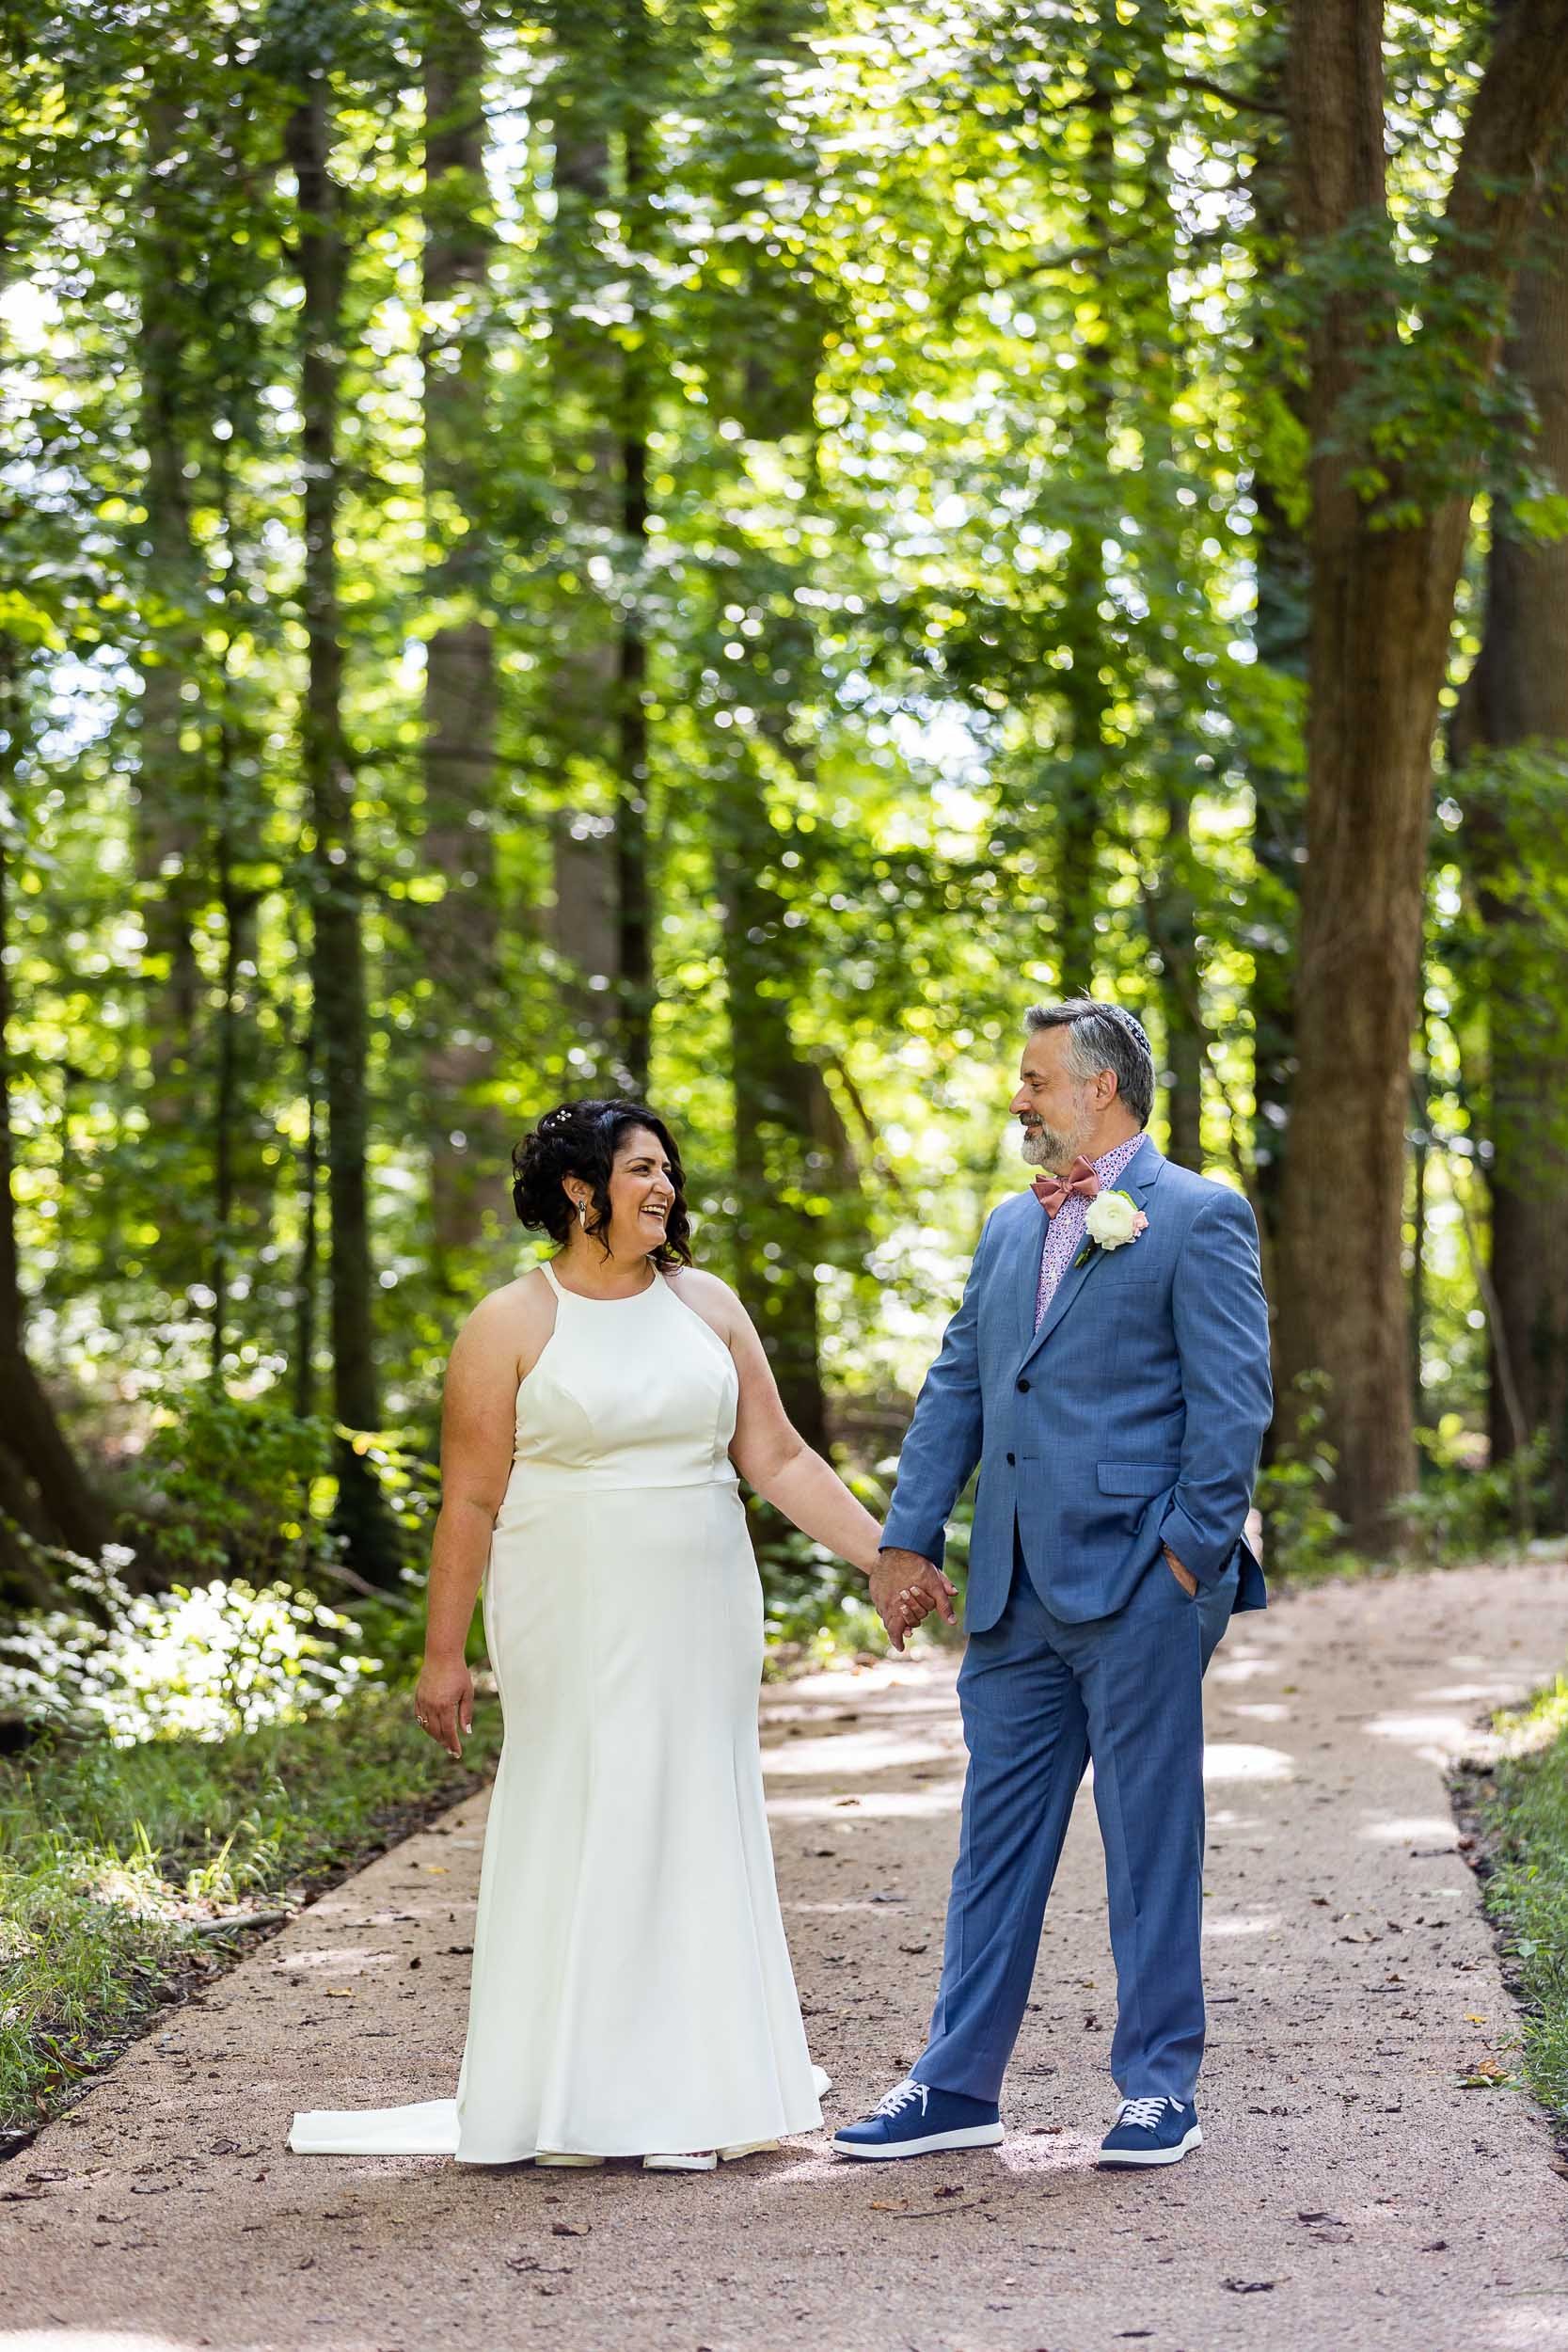 woodend-sanctuary-chevy-chase-md-august-summer-wedding-23.jpg